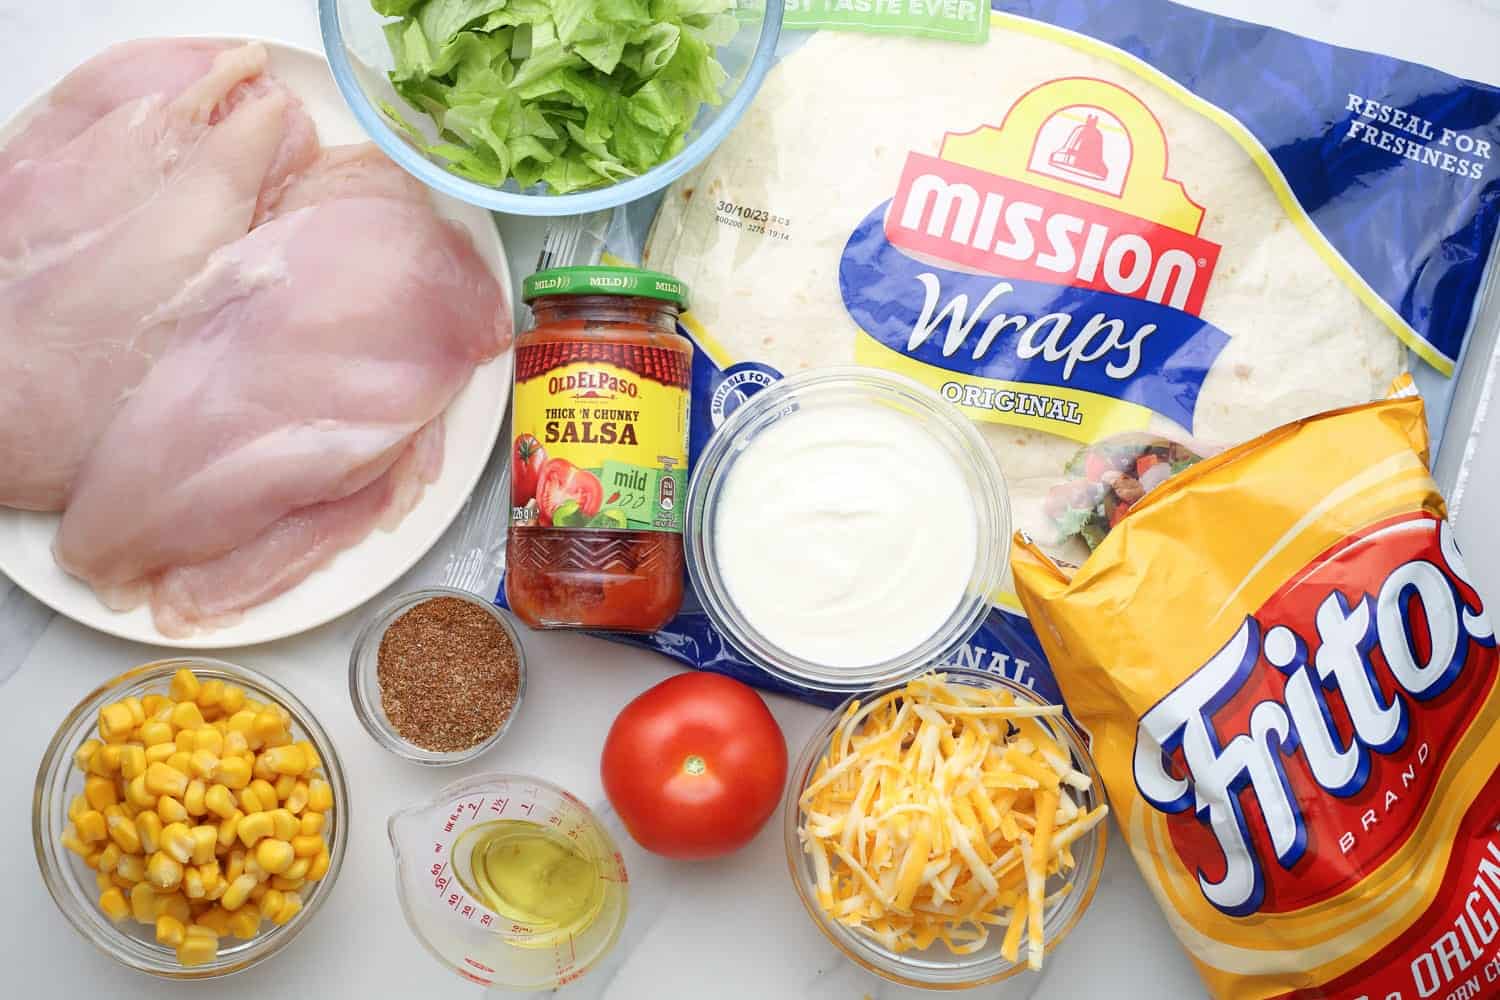 The ingredients needed to make southwest chicken wraps, with large tortillas, chicken breast, and toppings. A bag of fritos is also with the ingredients.